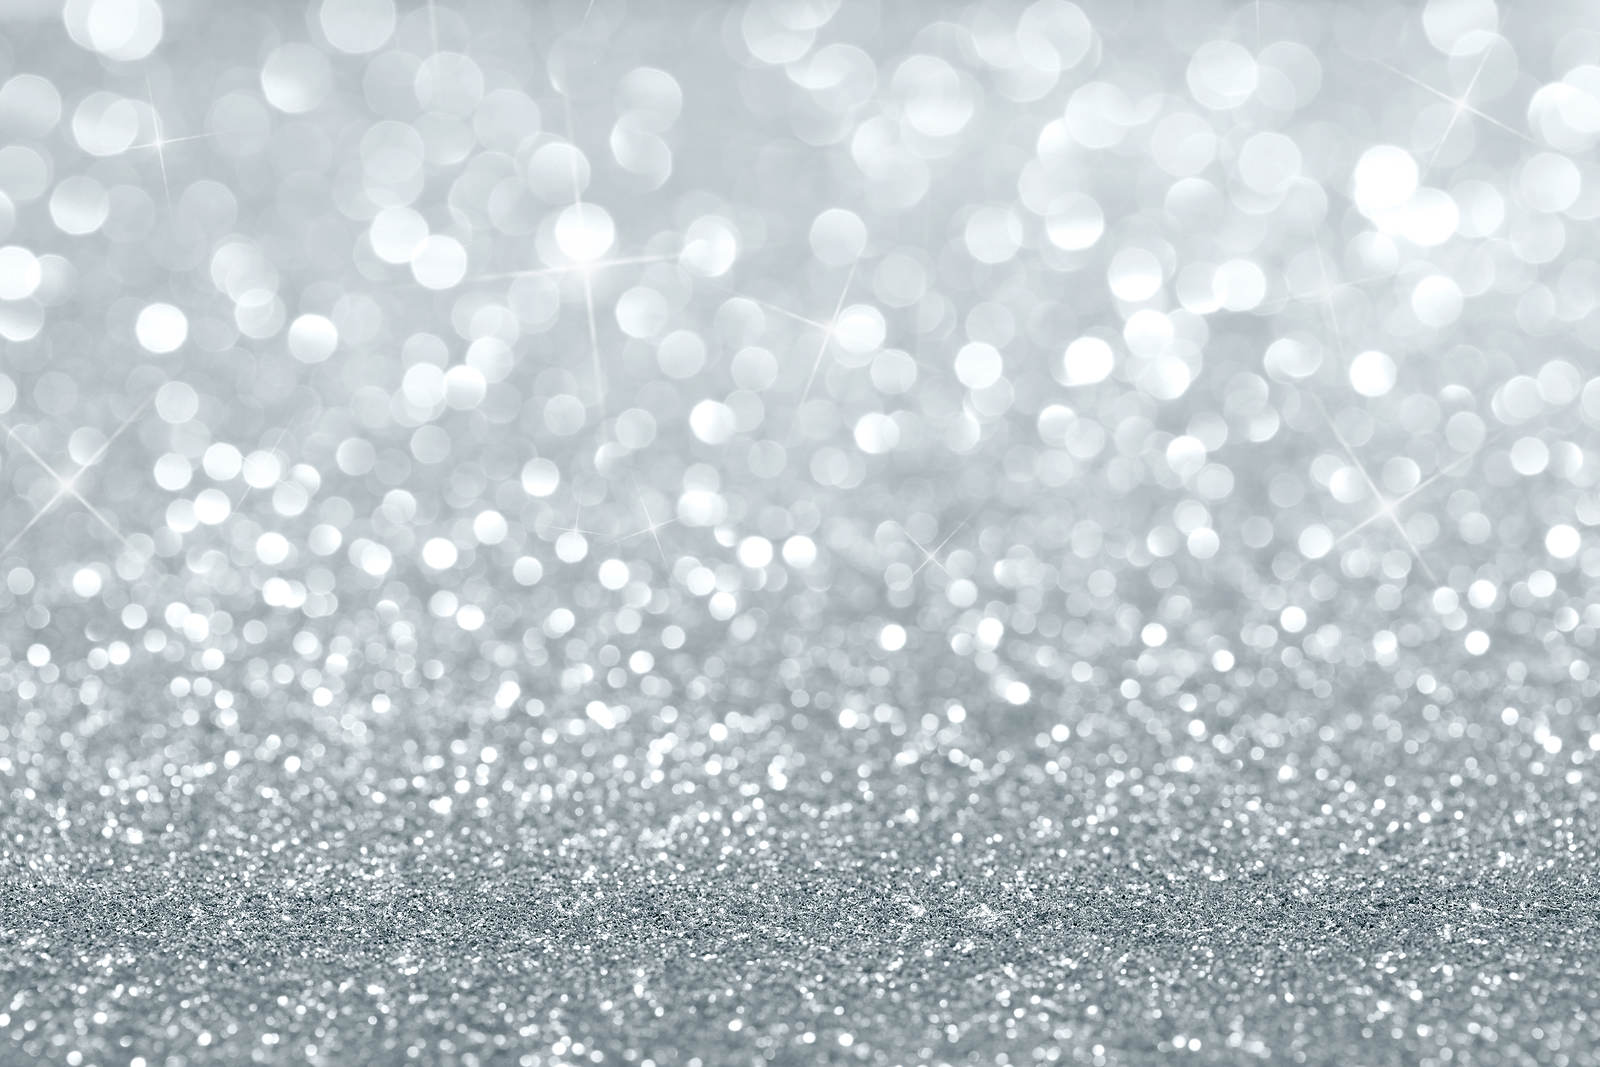 Silver Glitter Wallpaper Images amp Pictures   Becuo